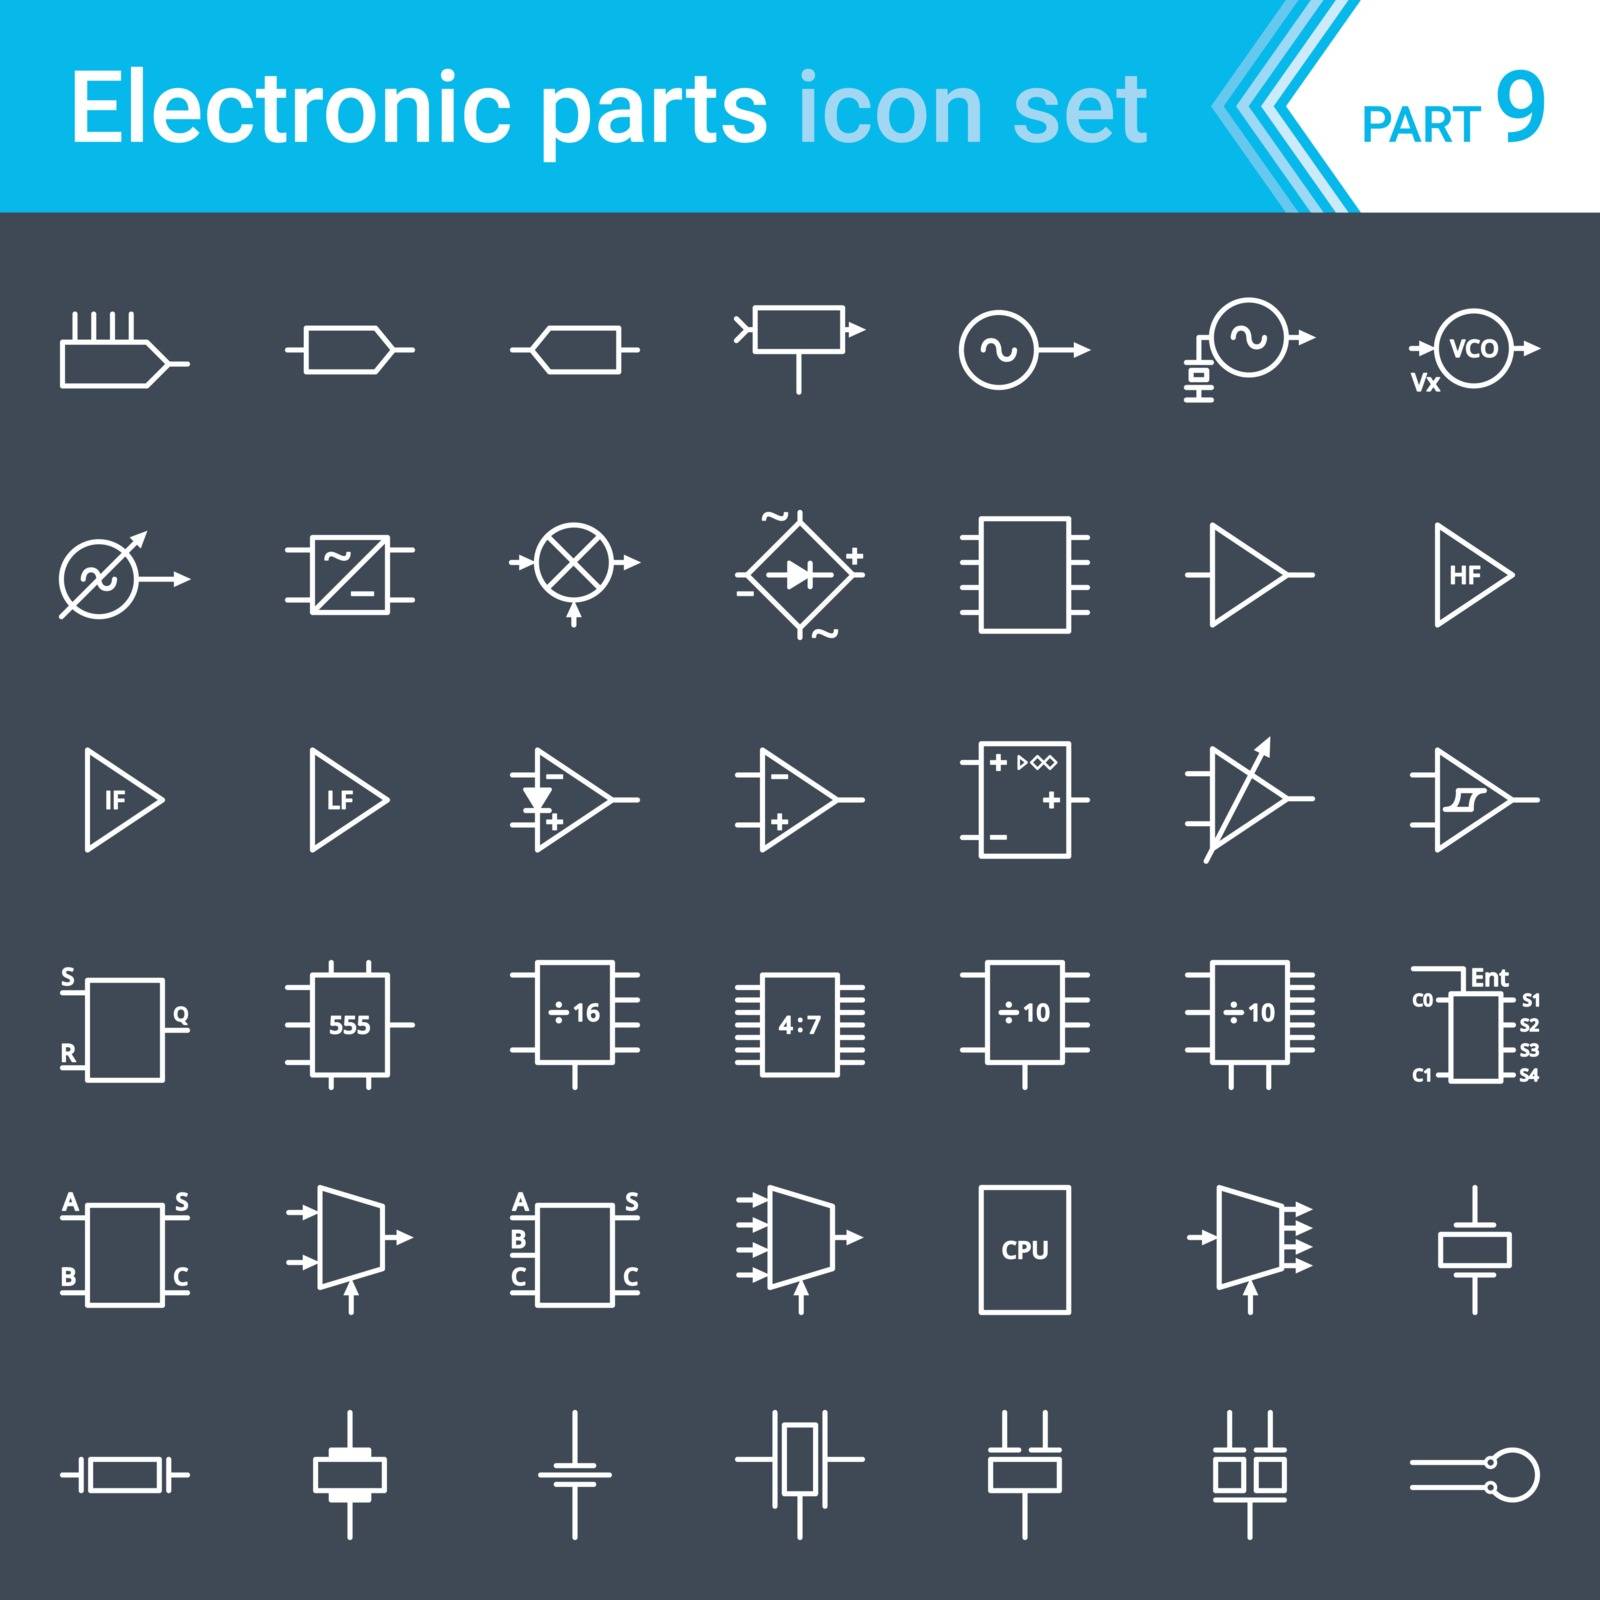 Complete vector set of electric and electronic circuit diagram symbols and elements - circuitry, blocks, stages, amplifier, logic circuits, piezoelectric crystals and crystal oscillators